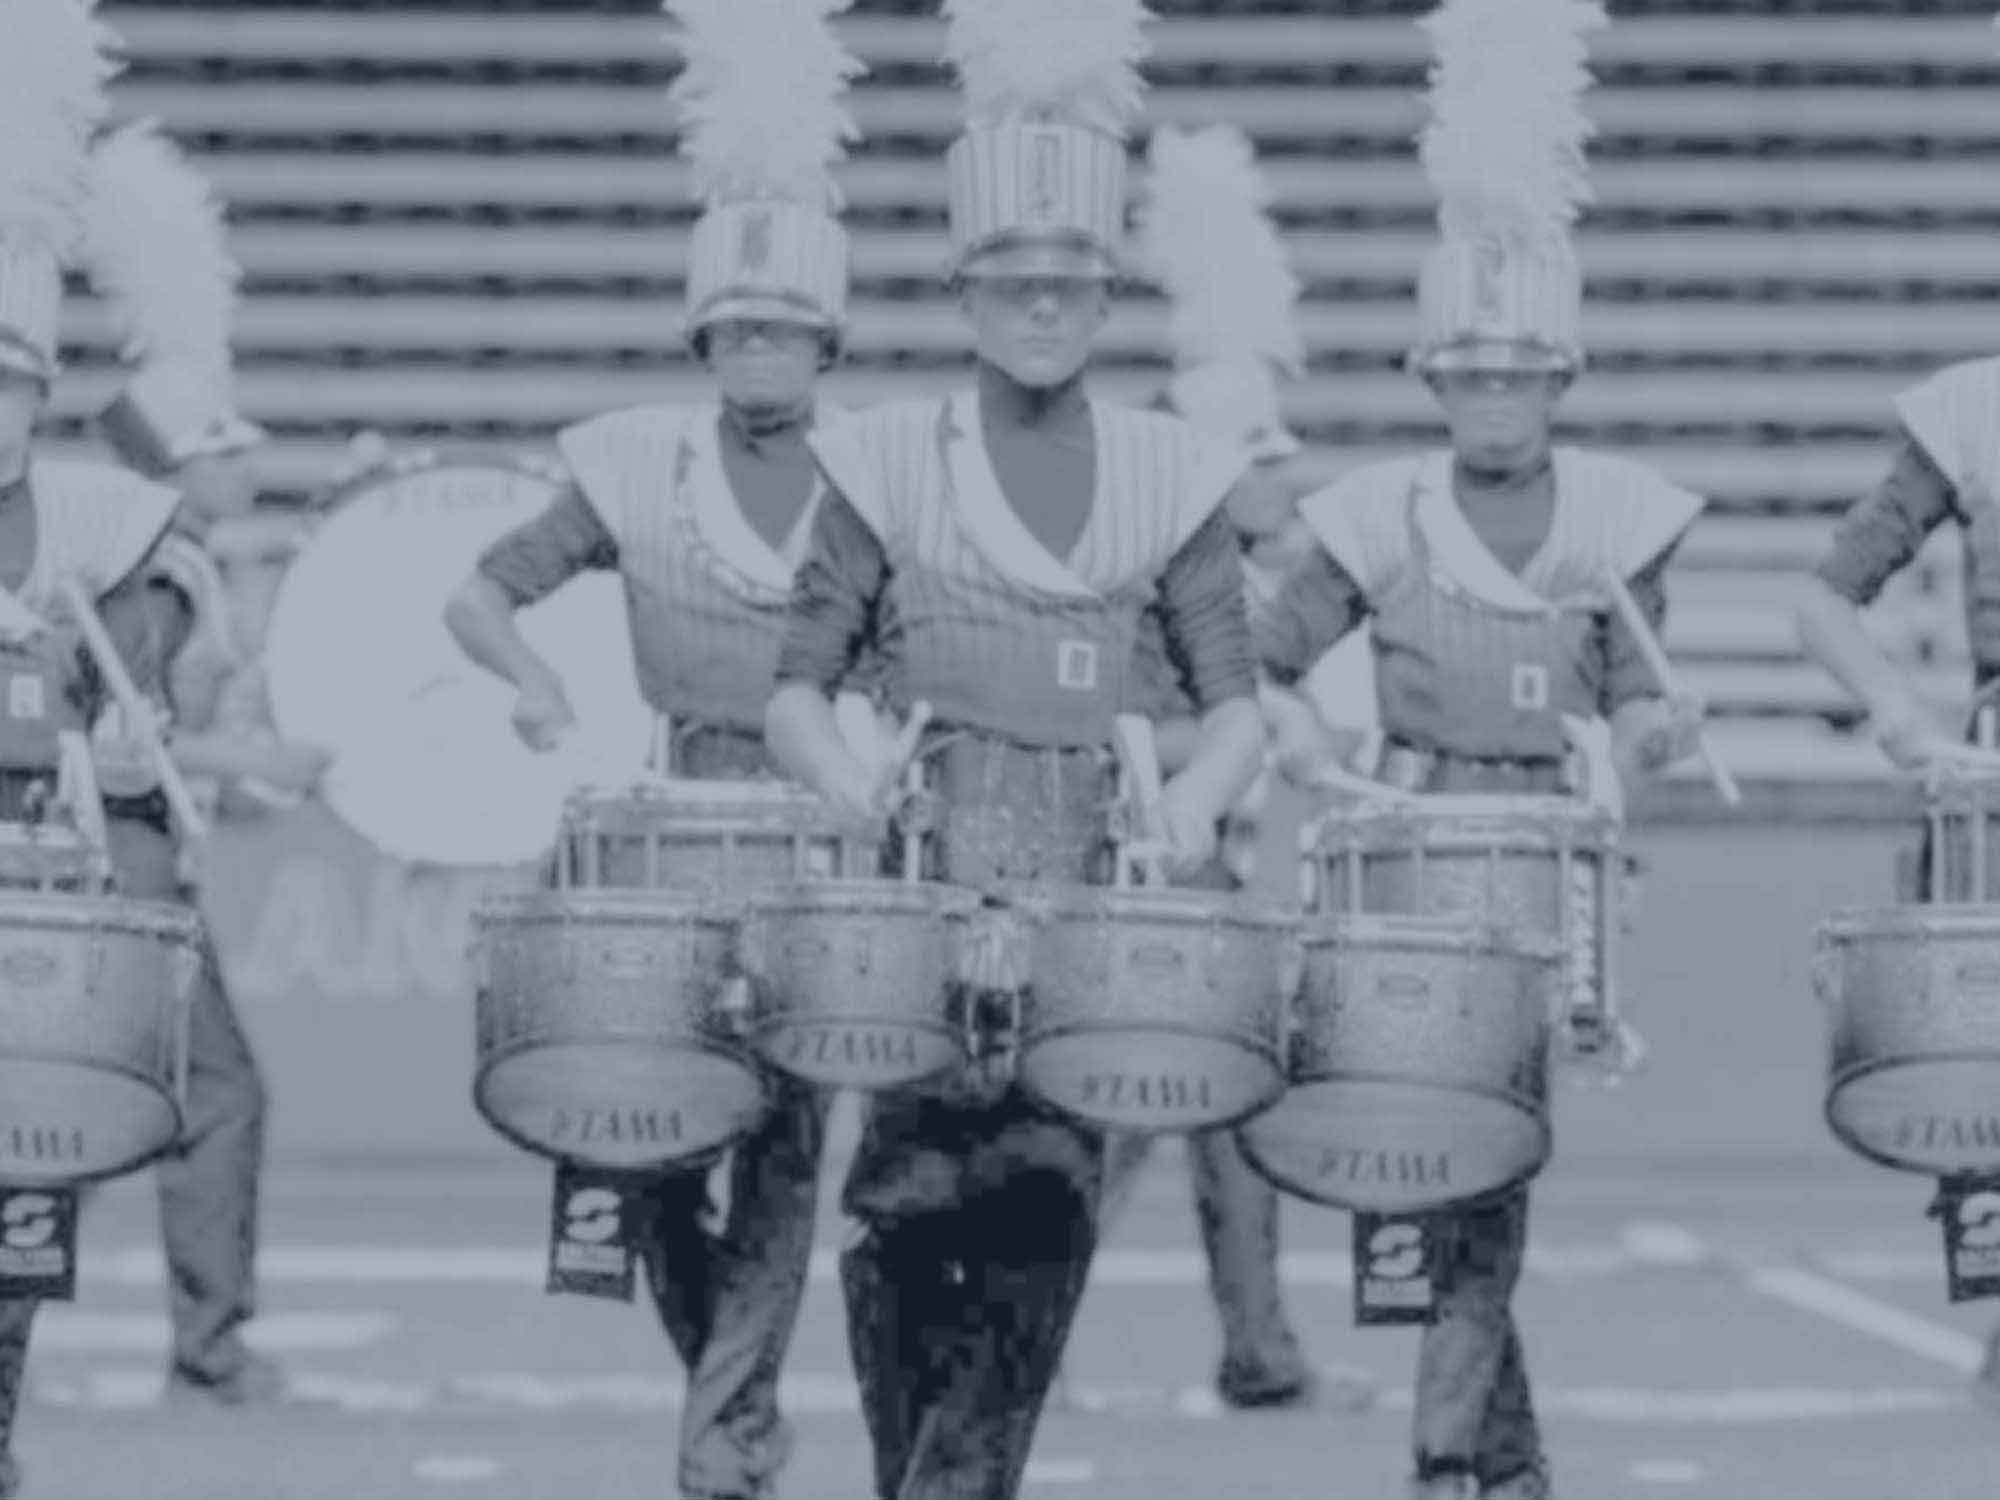 Marching Arts Programs Innovate. Shouldn’t Fundraising Evolve, Too?